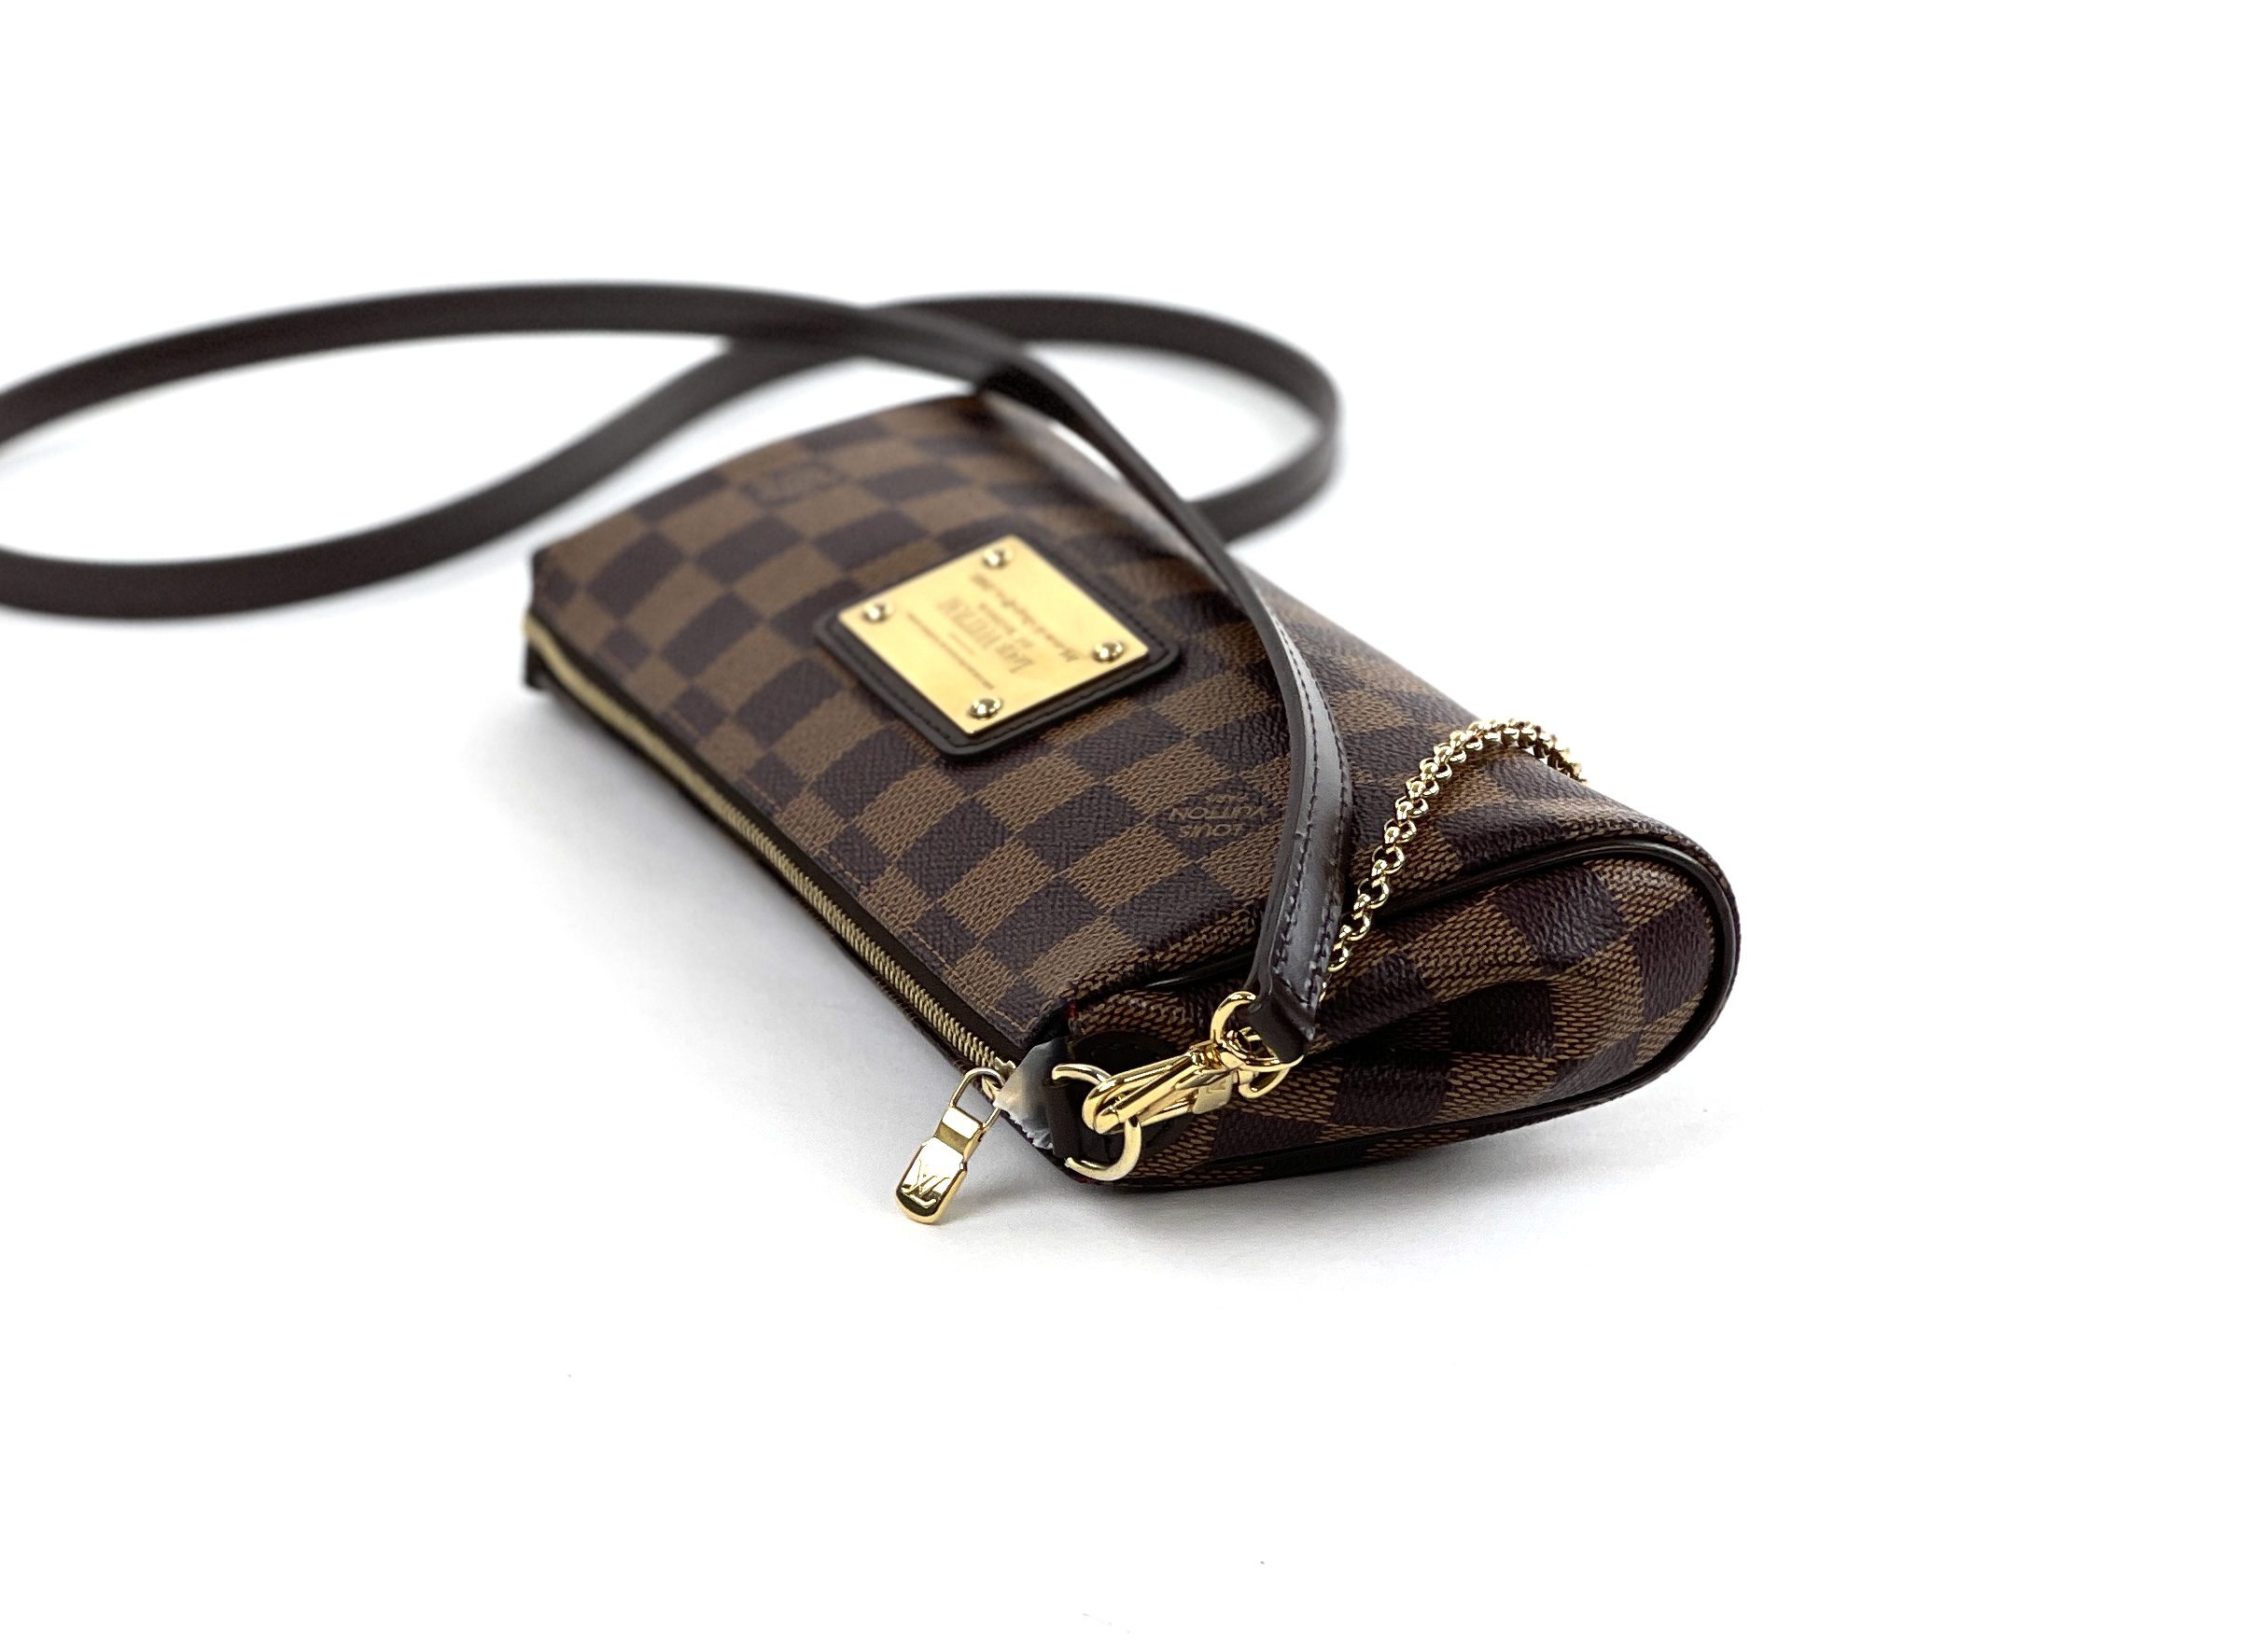 Louis Vuitton Eva Clutch in Damier Ebene Canvas❤, Gallery posted by Lexie